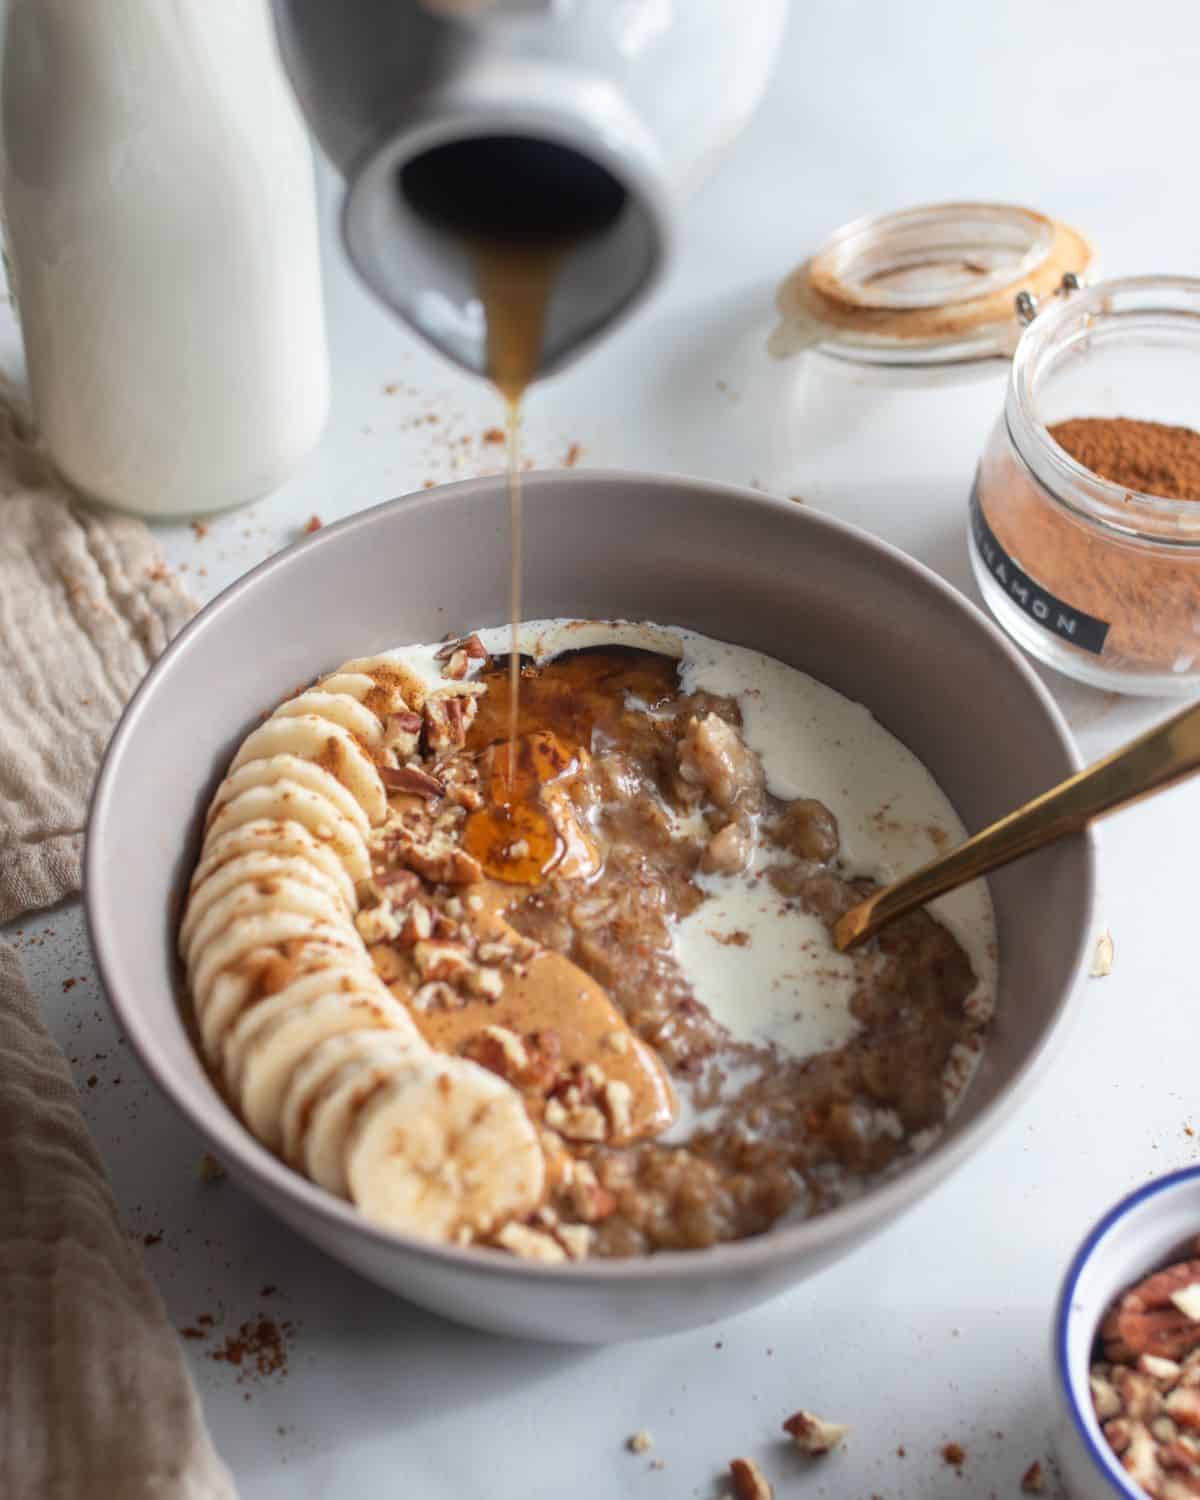 Bowl of date oatmeal with banana, pecan and cream topping, with maple syrup being poured over it.